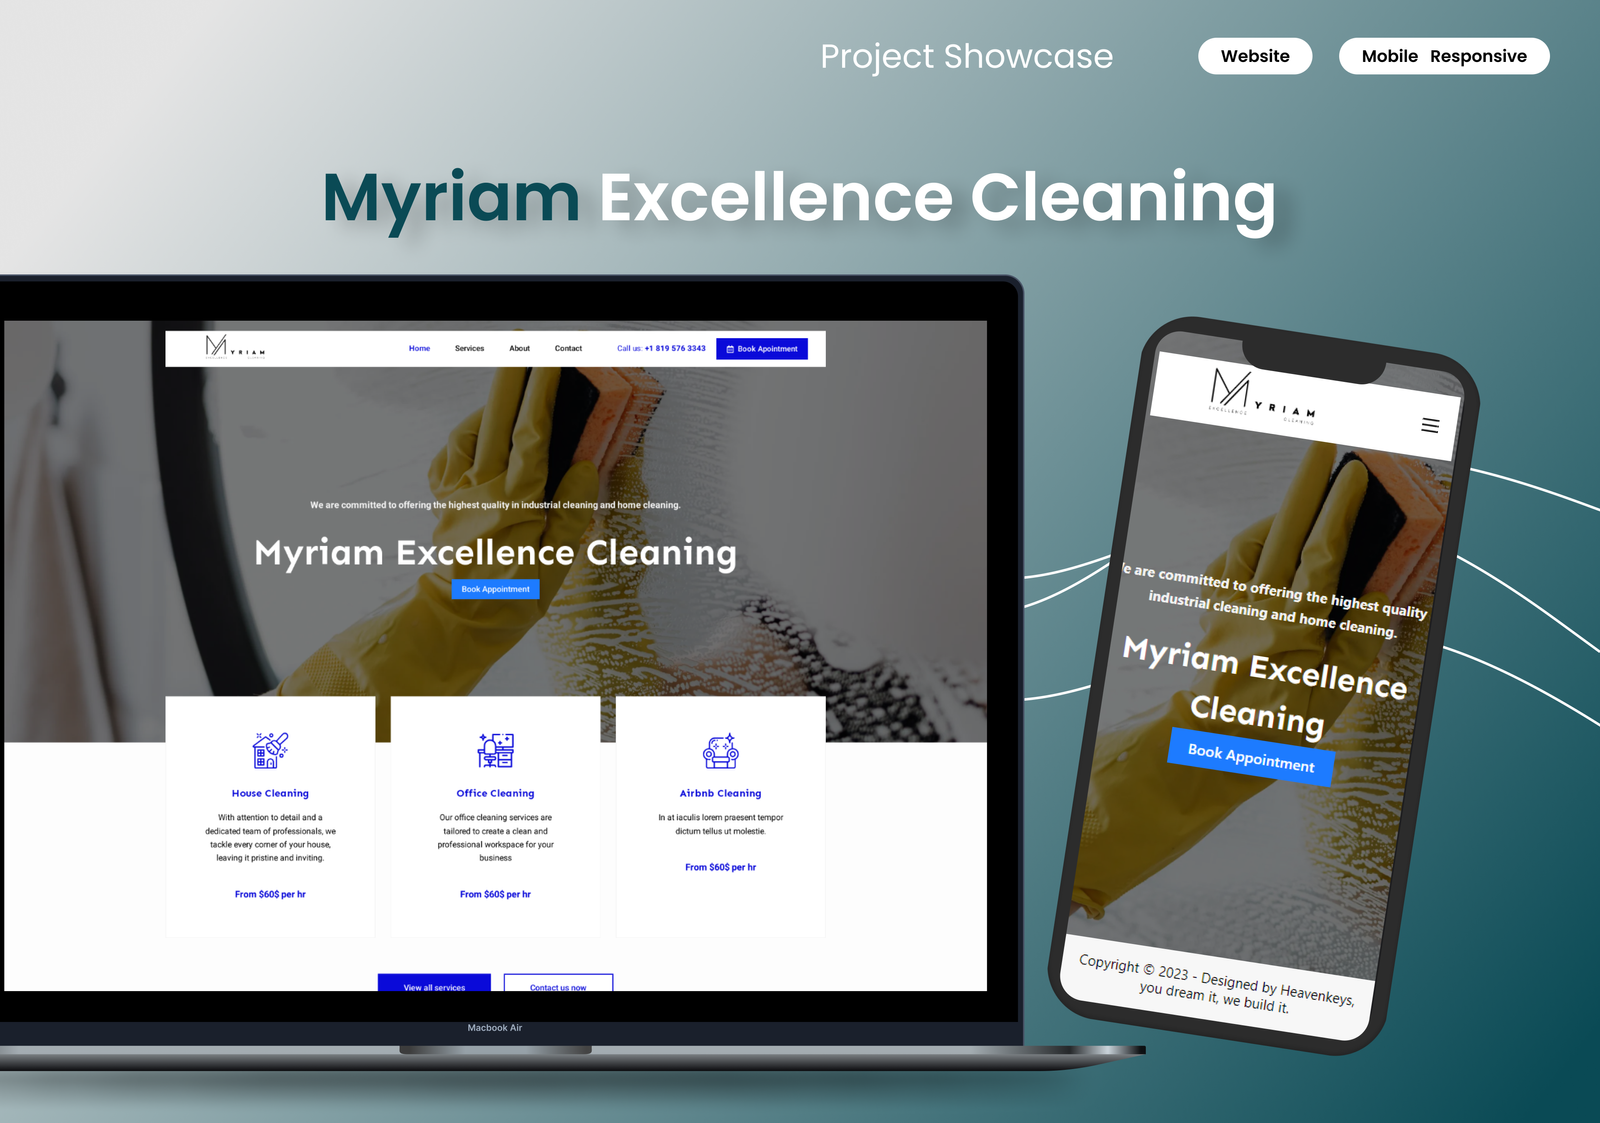 Myriam Excellence Cleaning